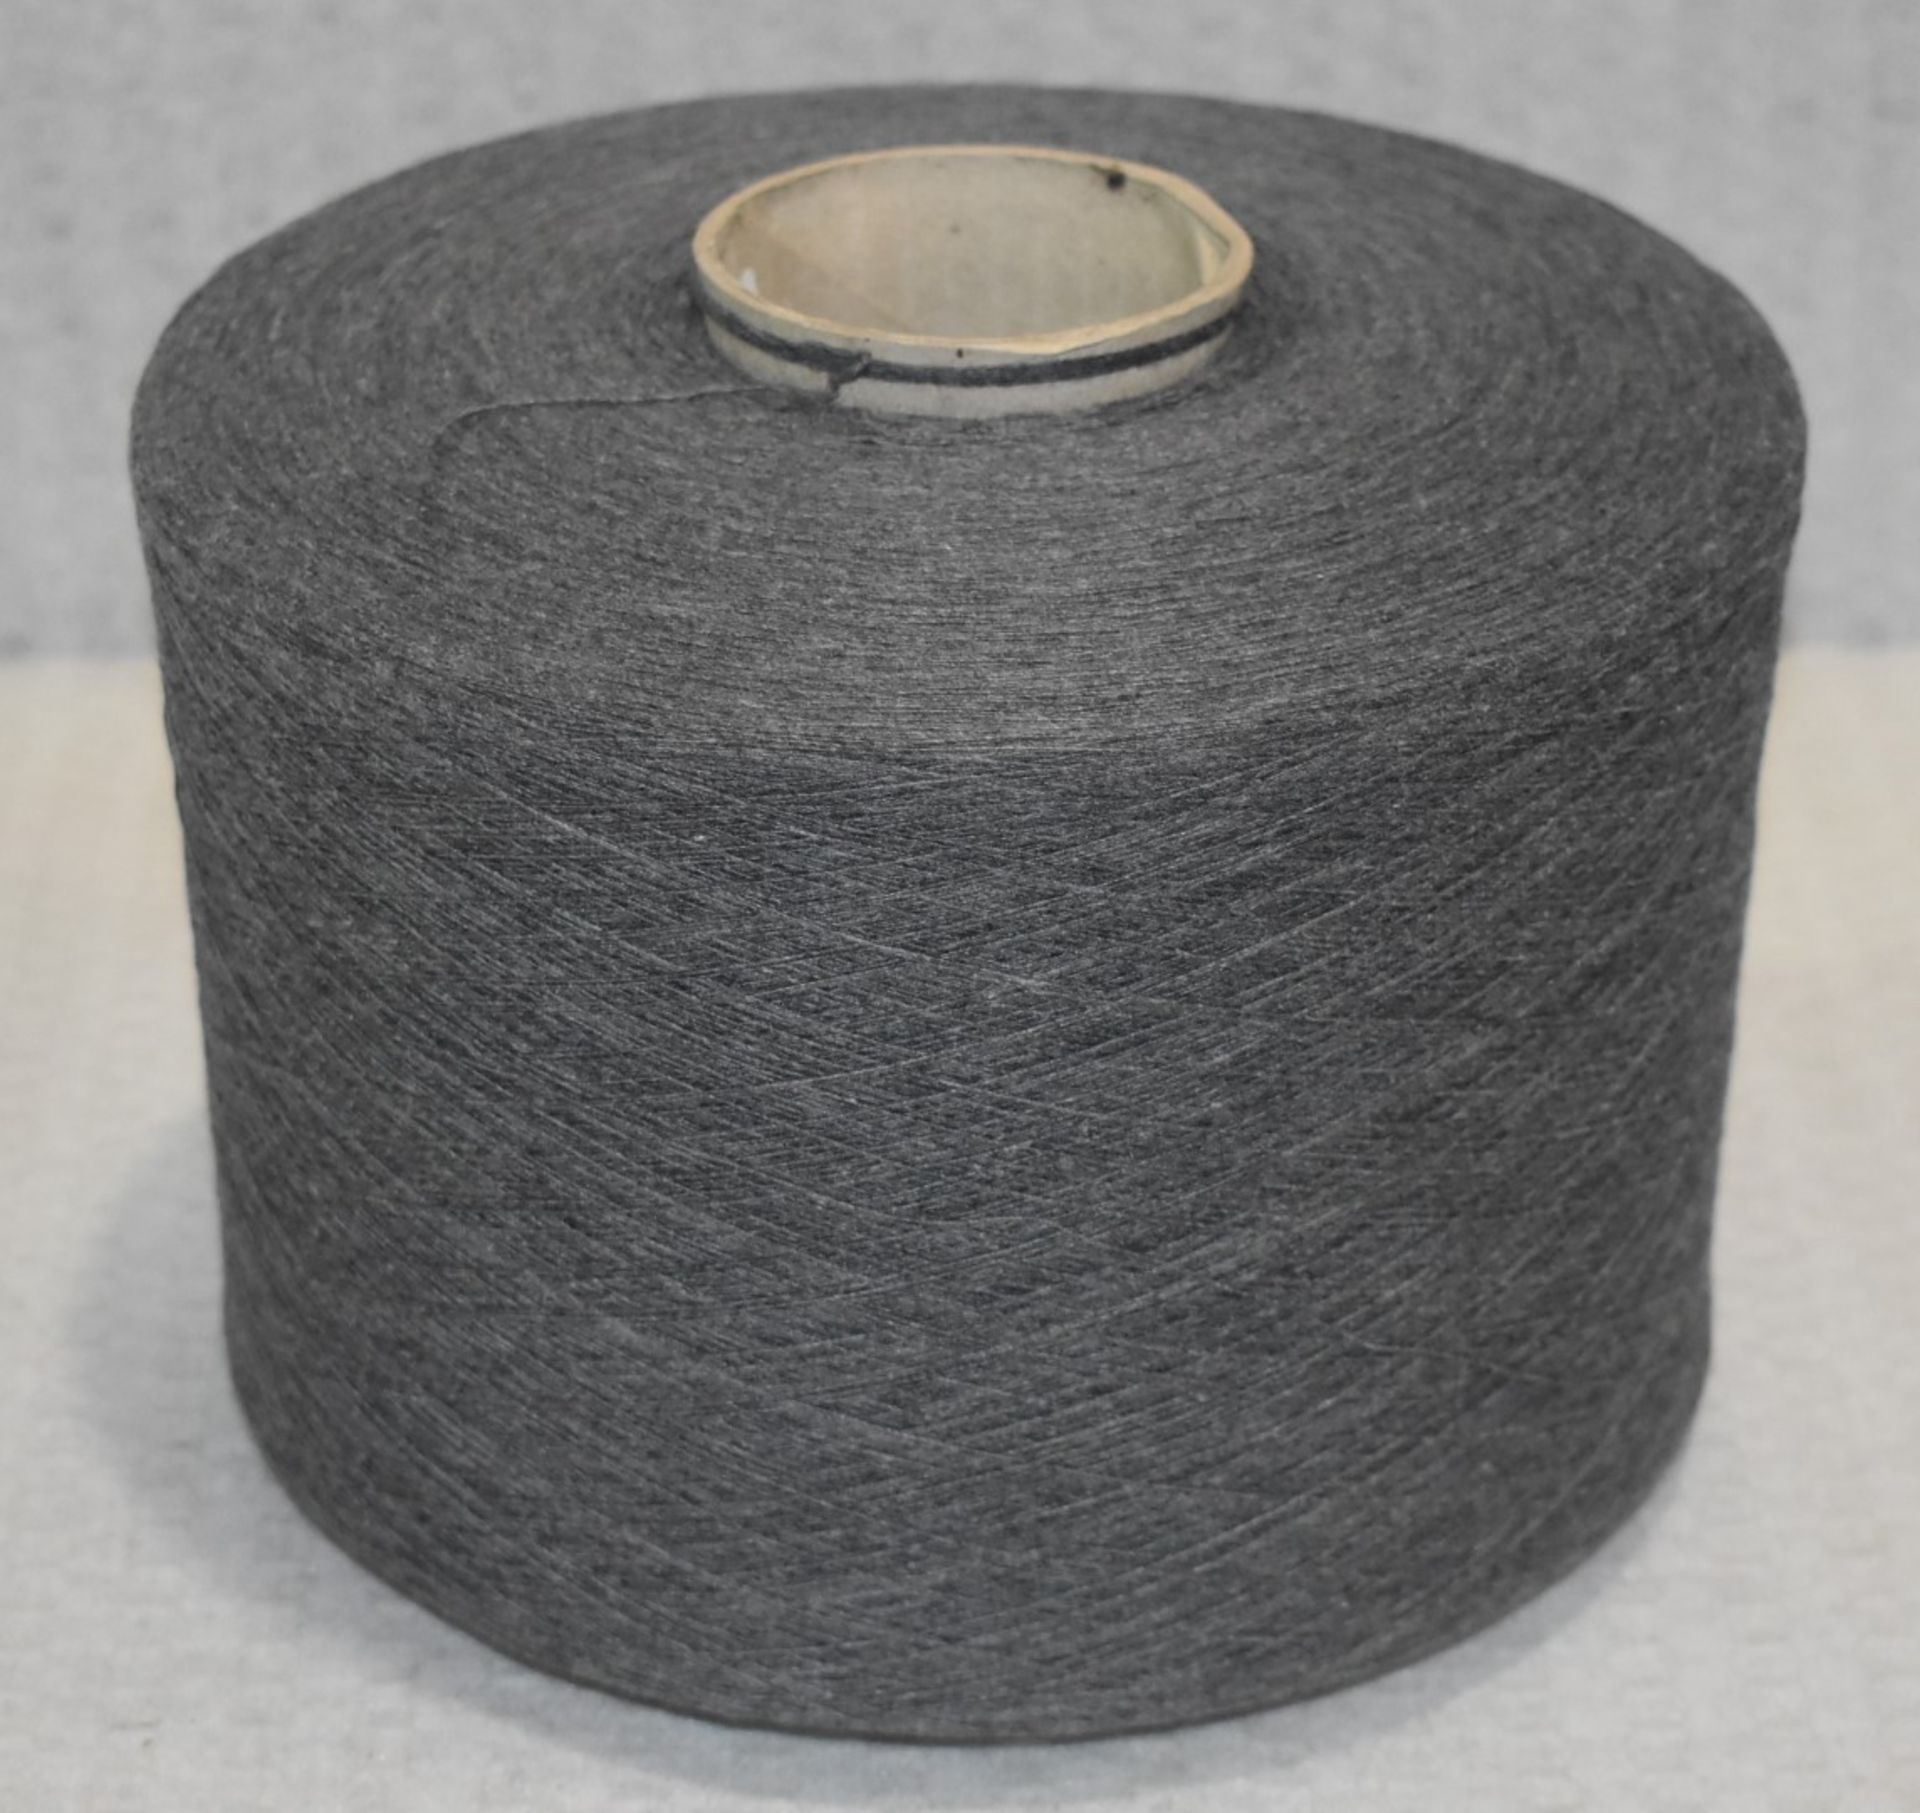 36 x Cones of 1/13 MicroCotton Knitting Yarn - Mid Grey - Approx Weight: 2,500g - New Stock ABL Yarn - Image 8 of 11